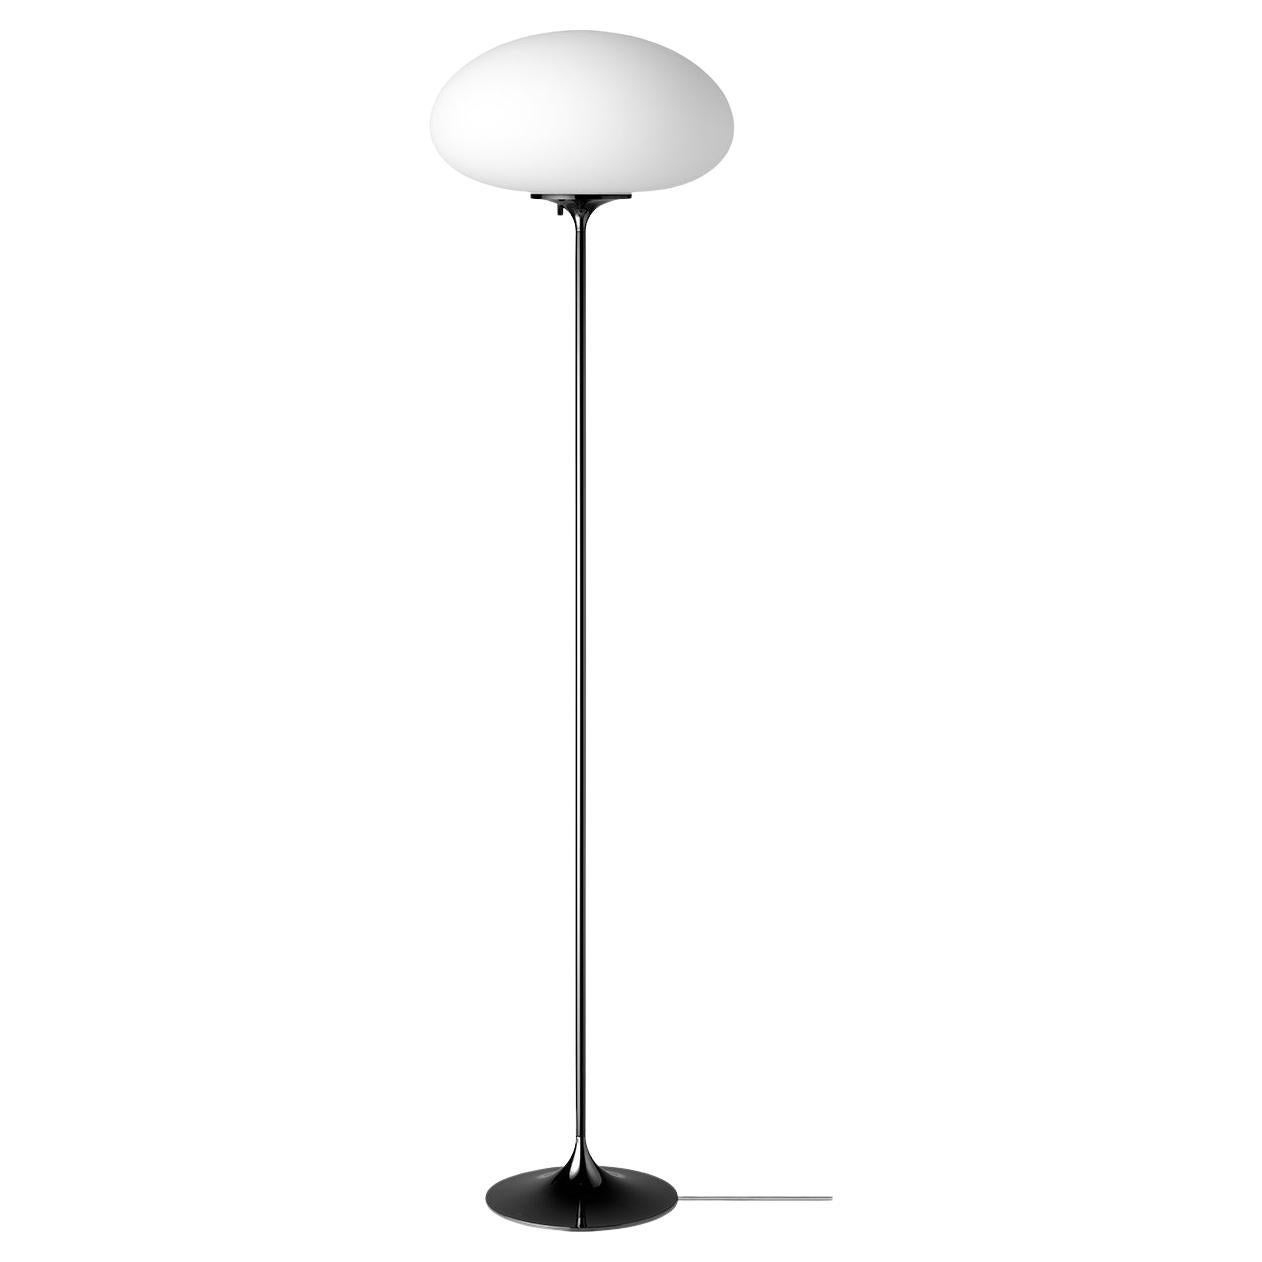 Stemlite Floor Lamp, H150, Frosted Glass, Black Chrome For Sale